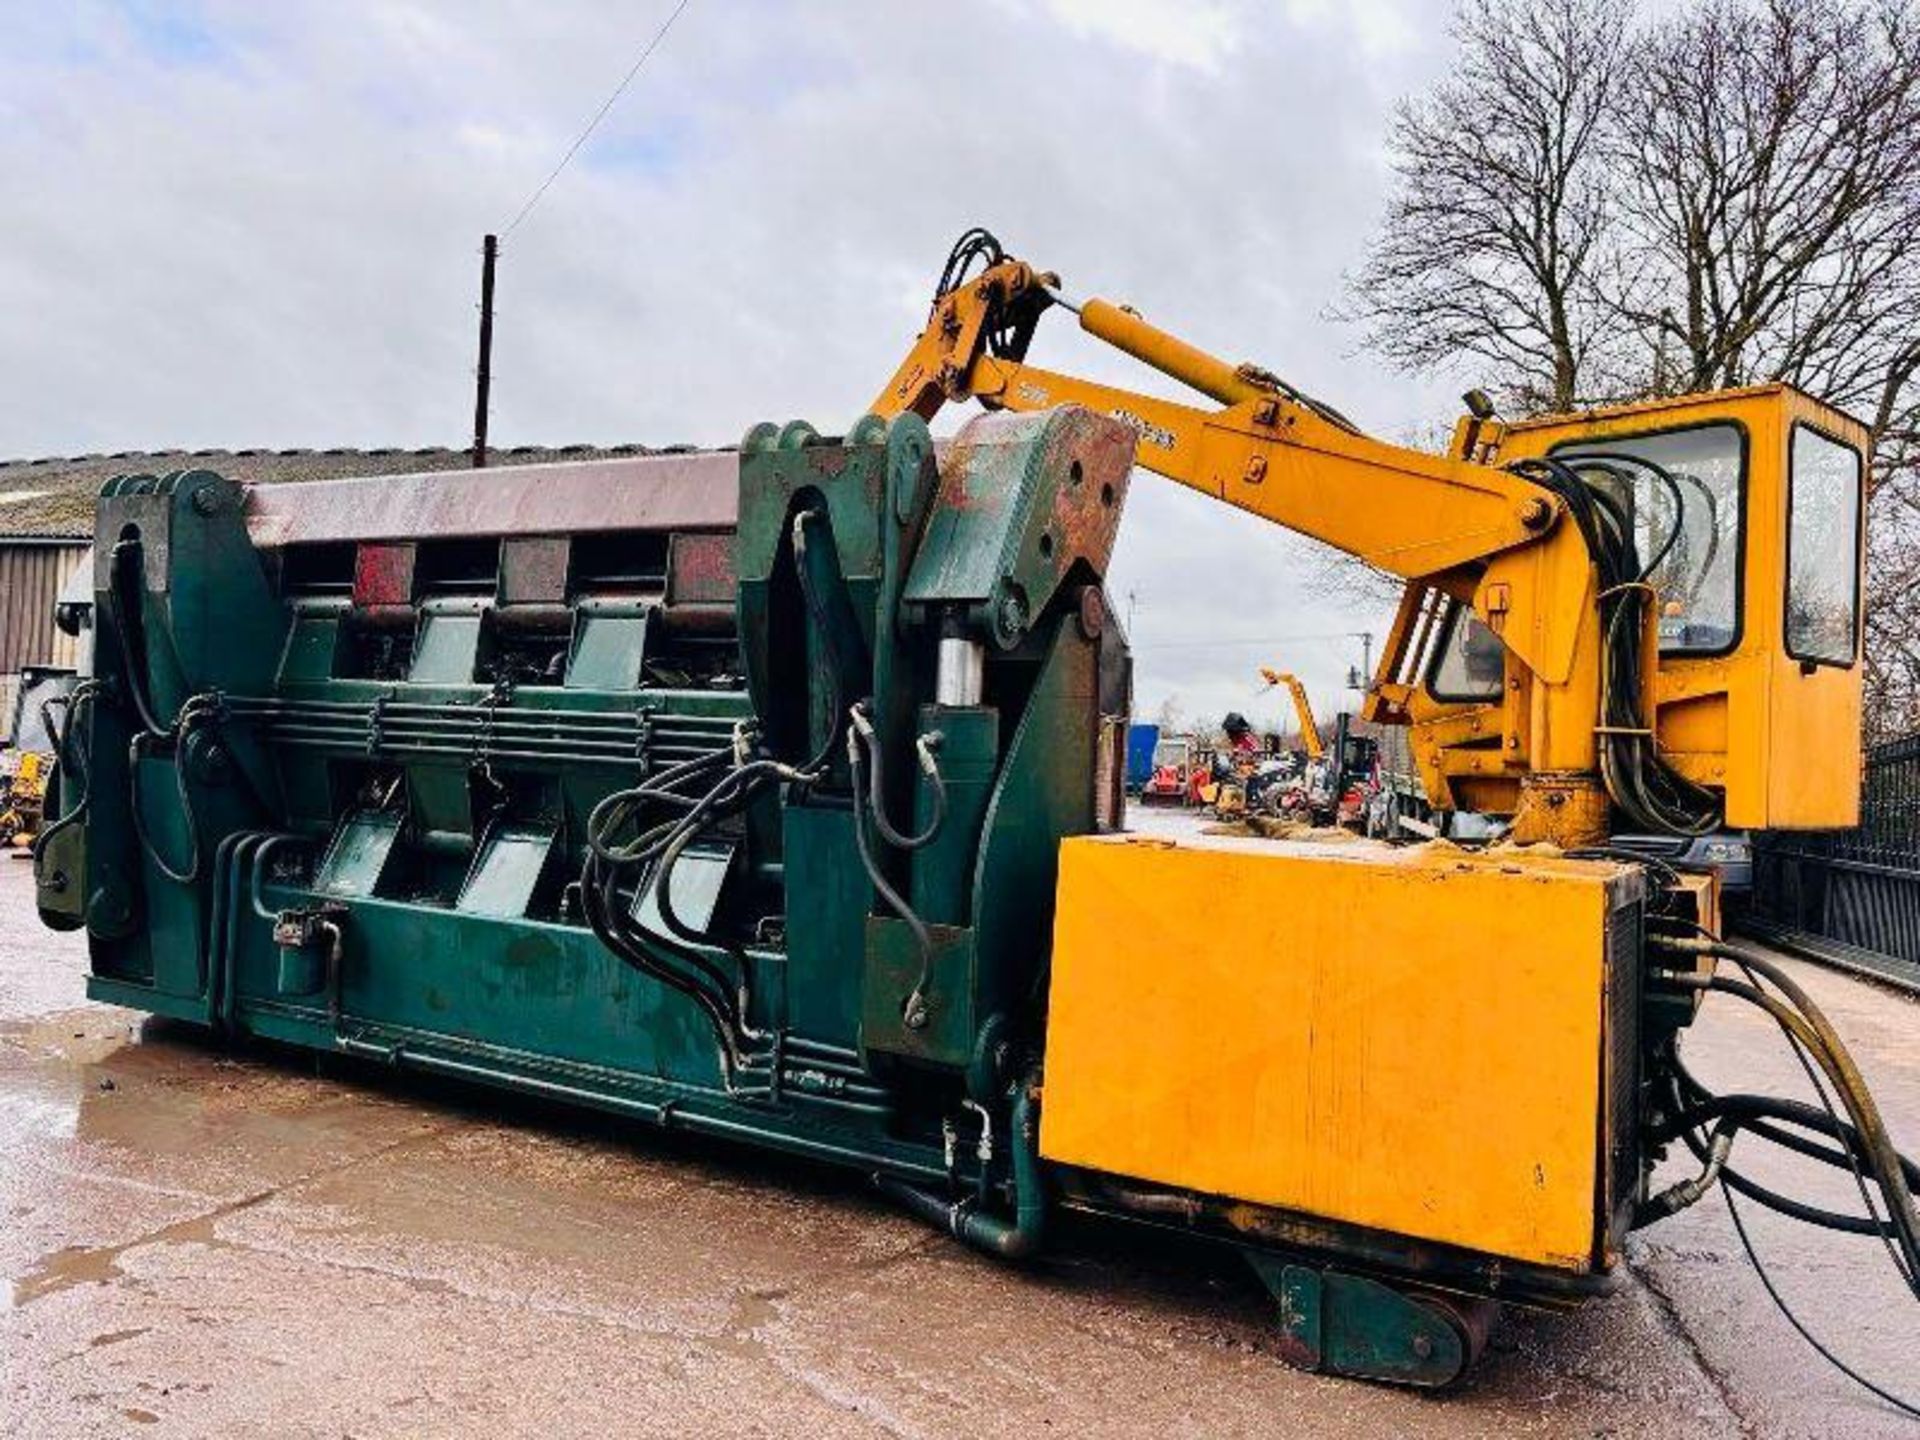 ECOMAC S4800G CAR BALER AND CRANE C/W ROLE ON ROLE OFF BODY  - Image 2 of 20